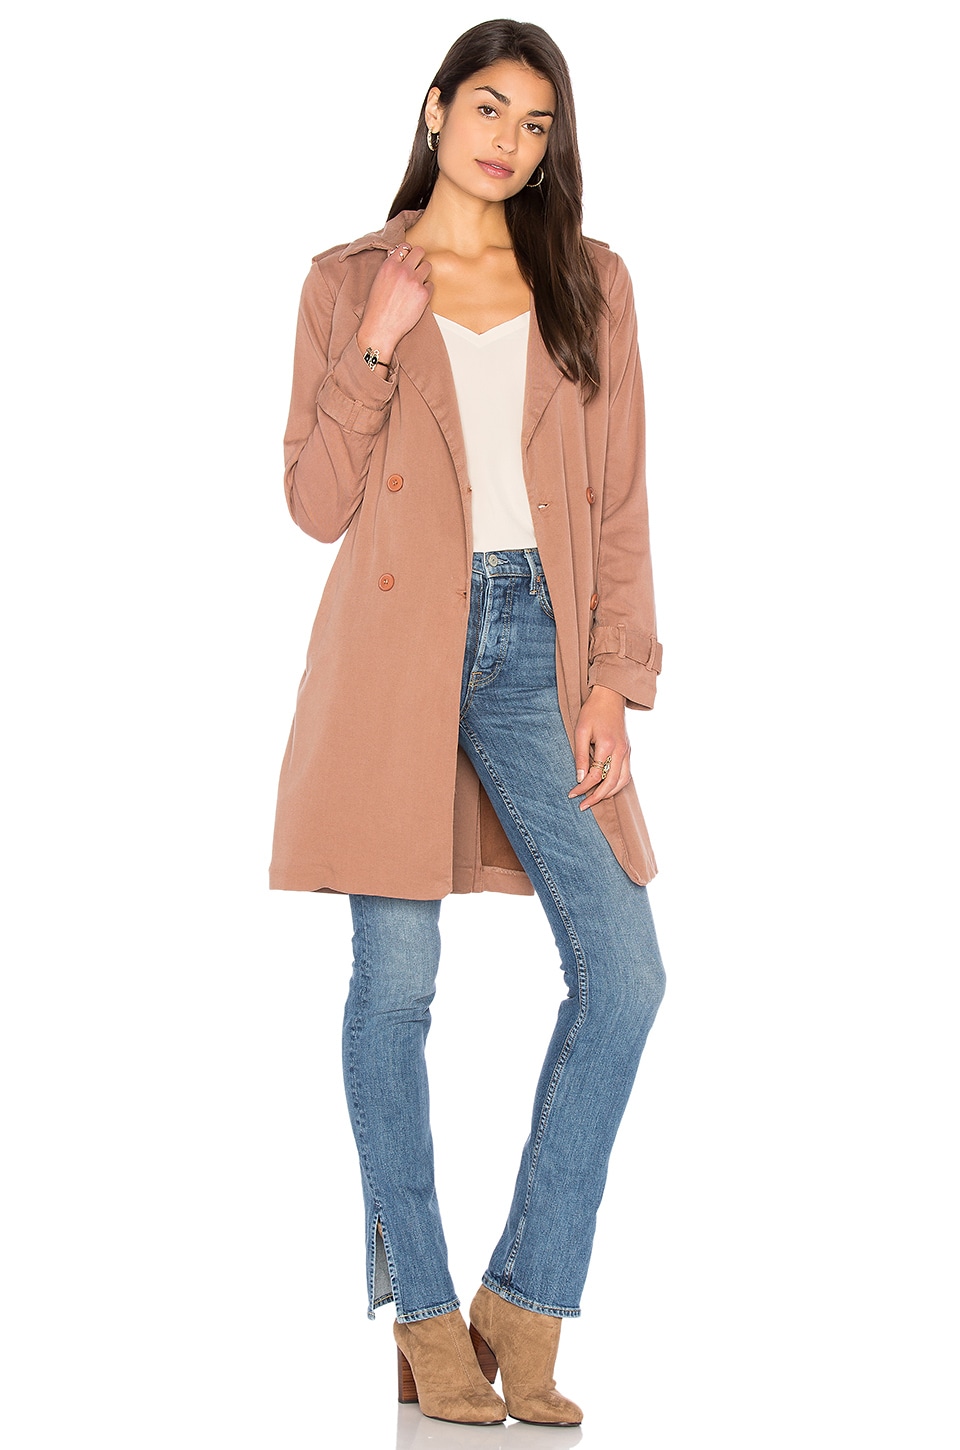 American Vintage Starland Trench in Nut | REVOLVE